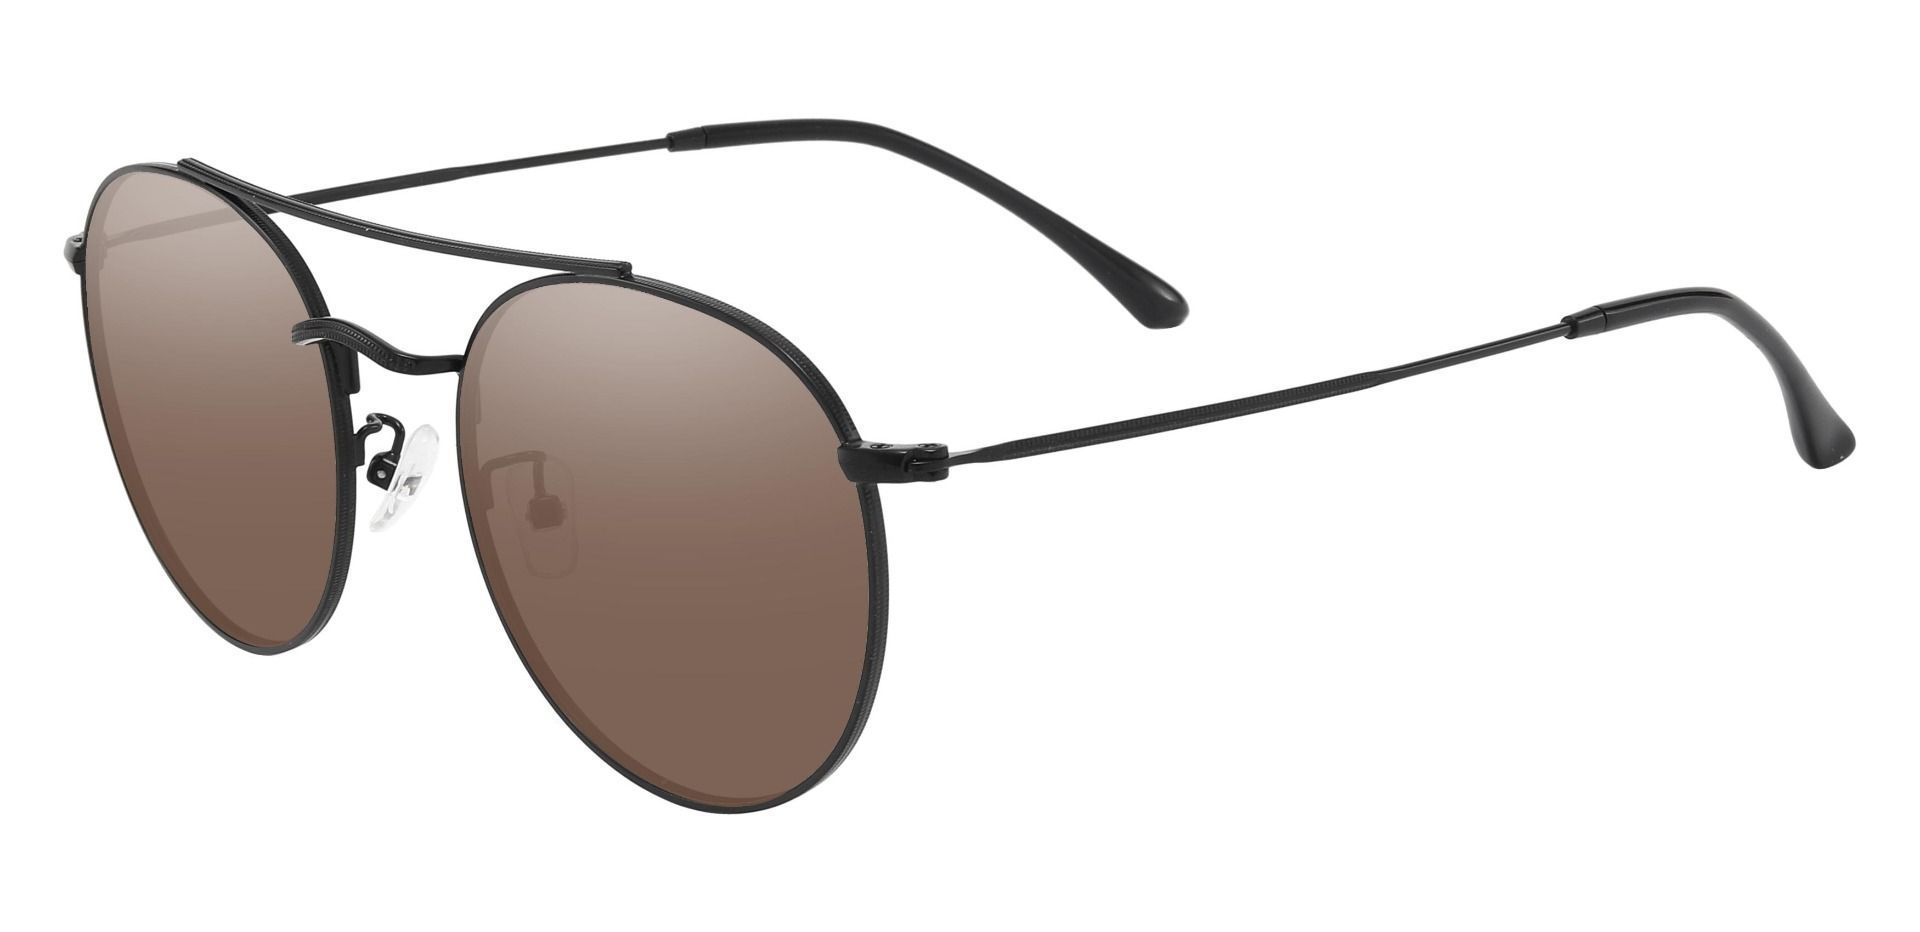 Junction Aviator Non-Rx Sunglasses - Black Frame With Brown Lenses